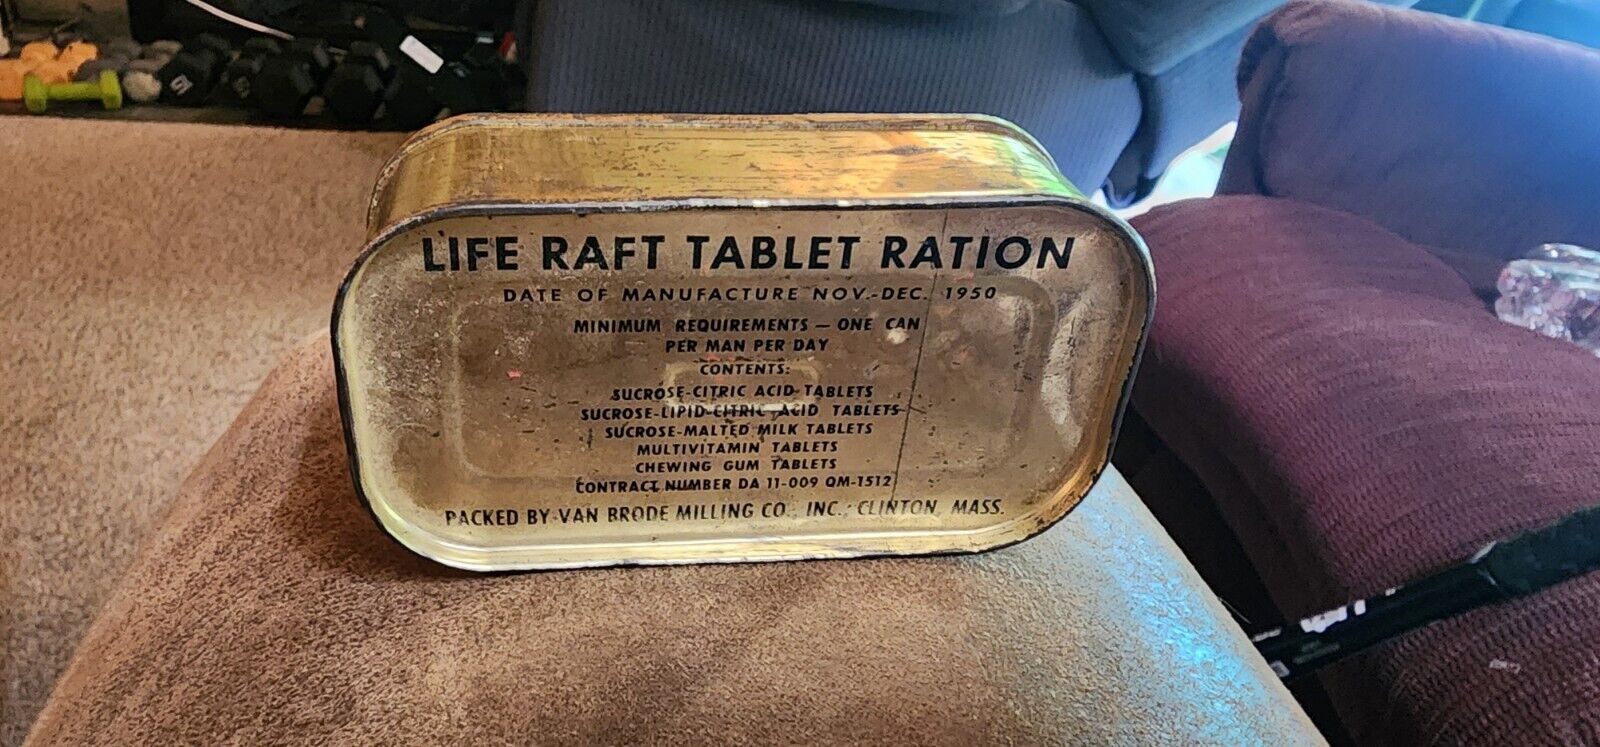 UNOPENED NAVY LIFE RAFT TABLET RATION 1950